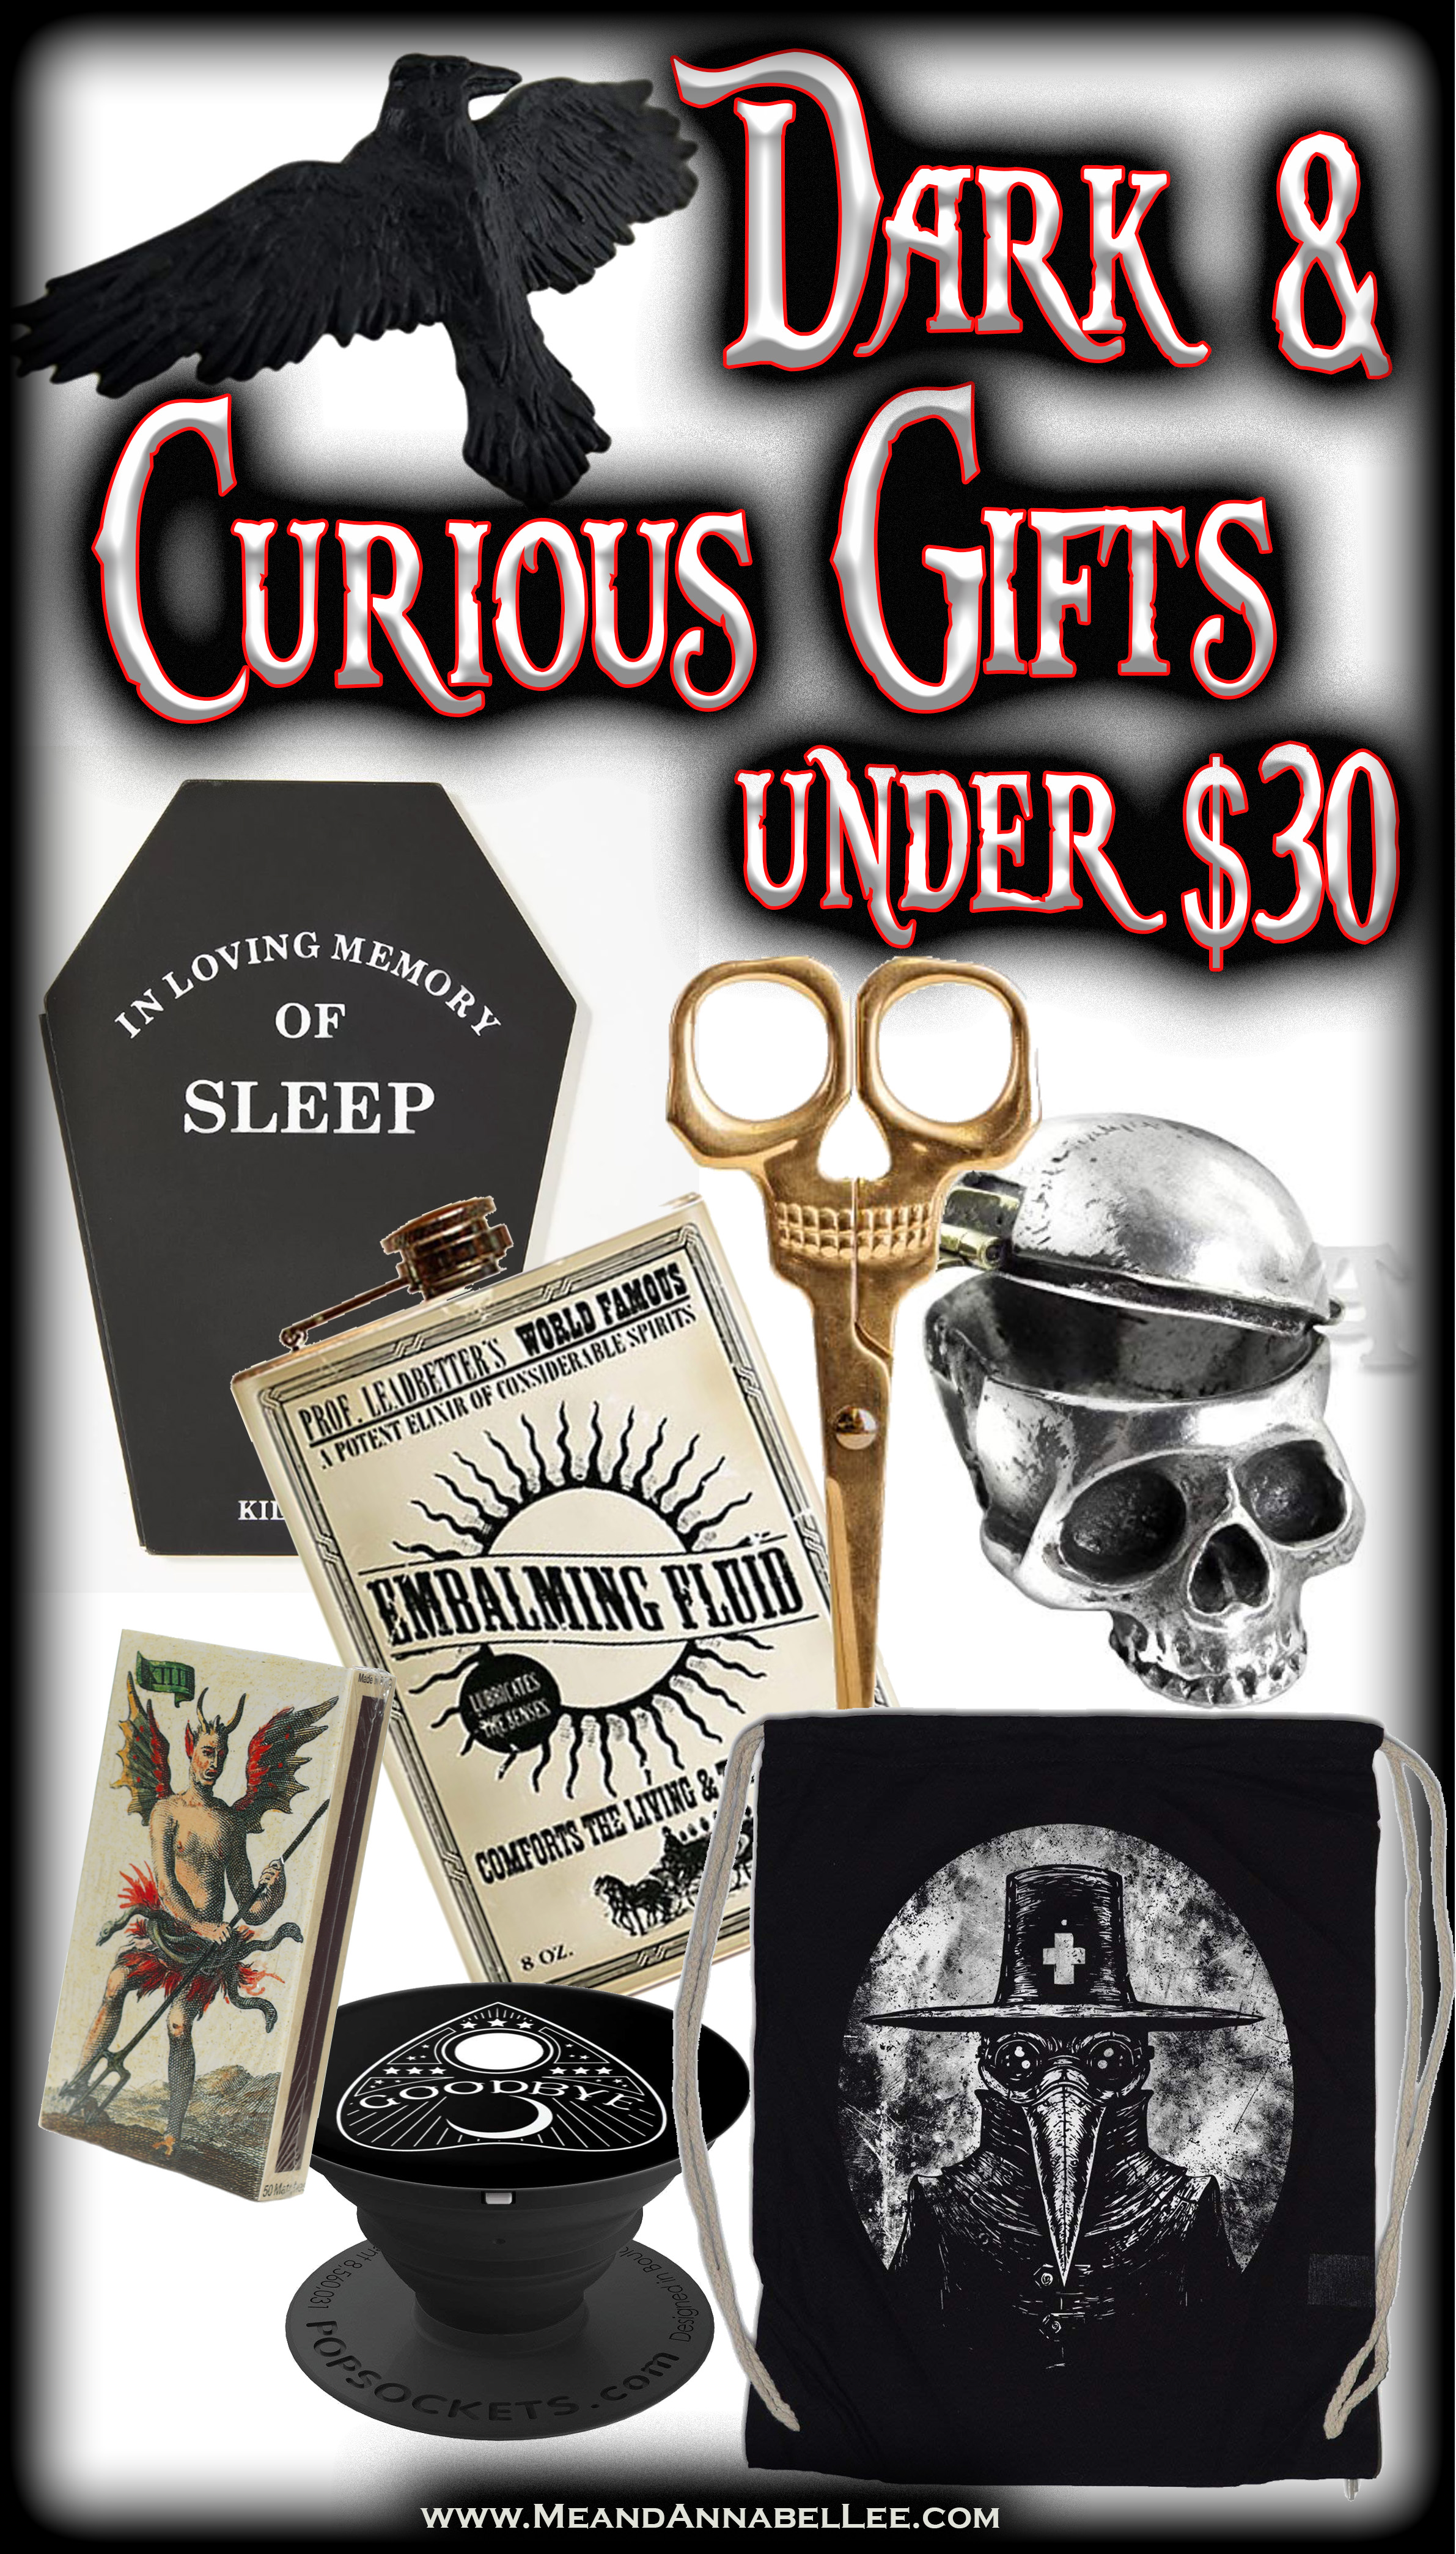 13 Gifts under $30 for Everyone On Your List - Merrick's Art